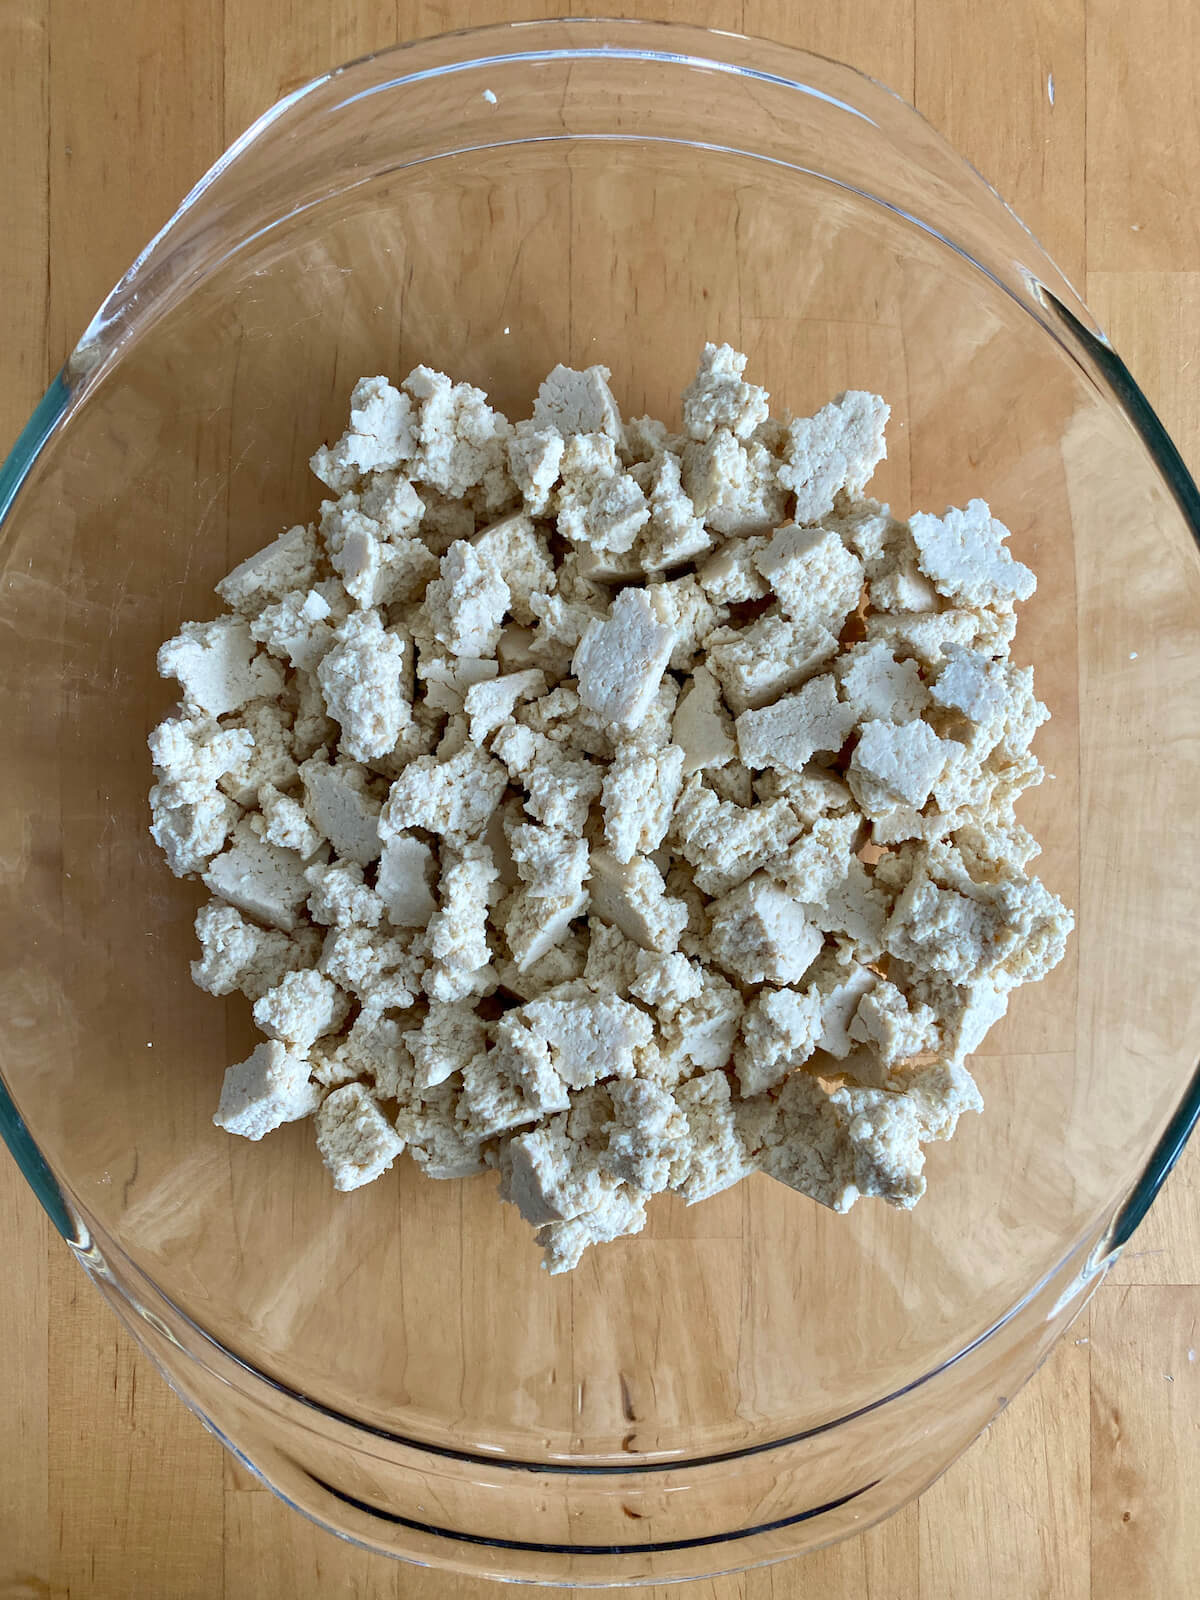 Crumbled tofu in a glass mixing bowl.